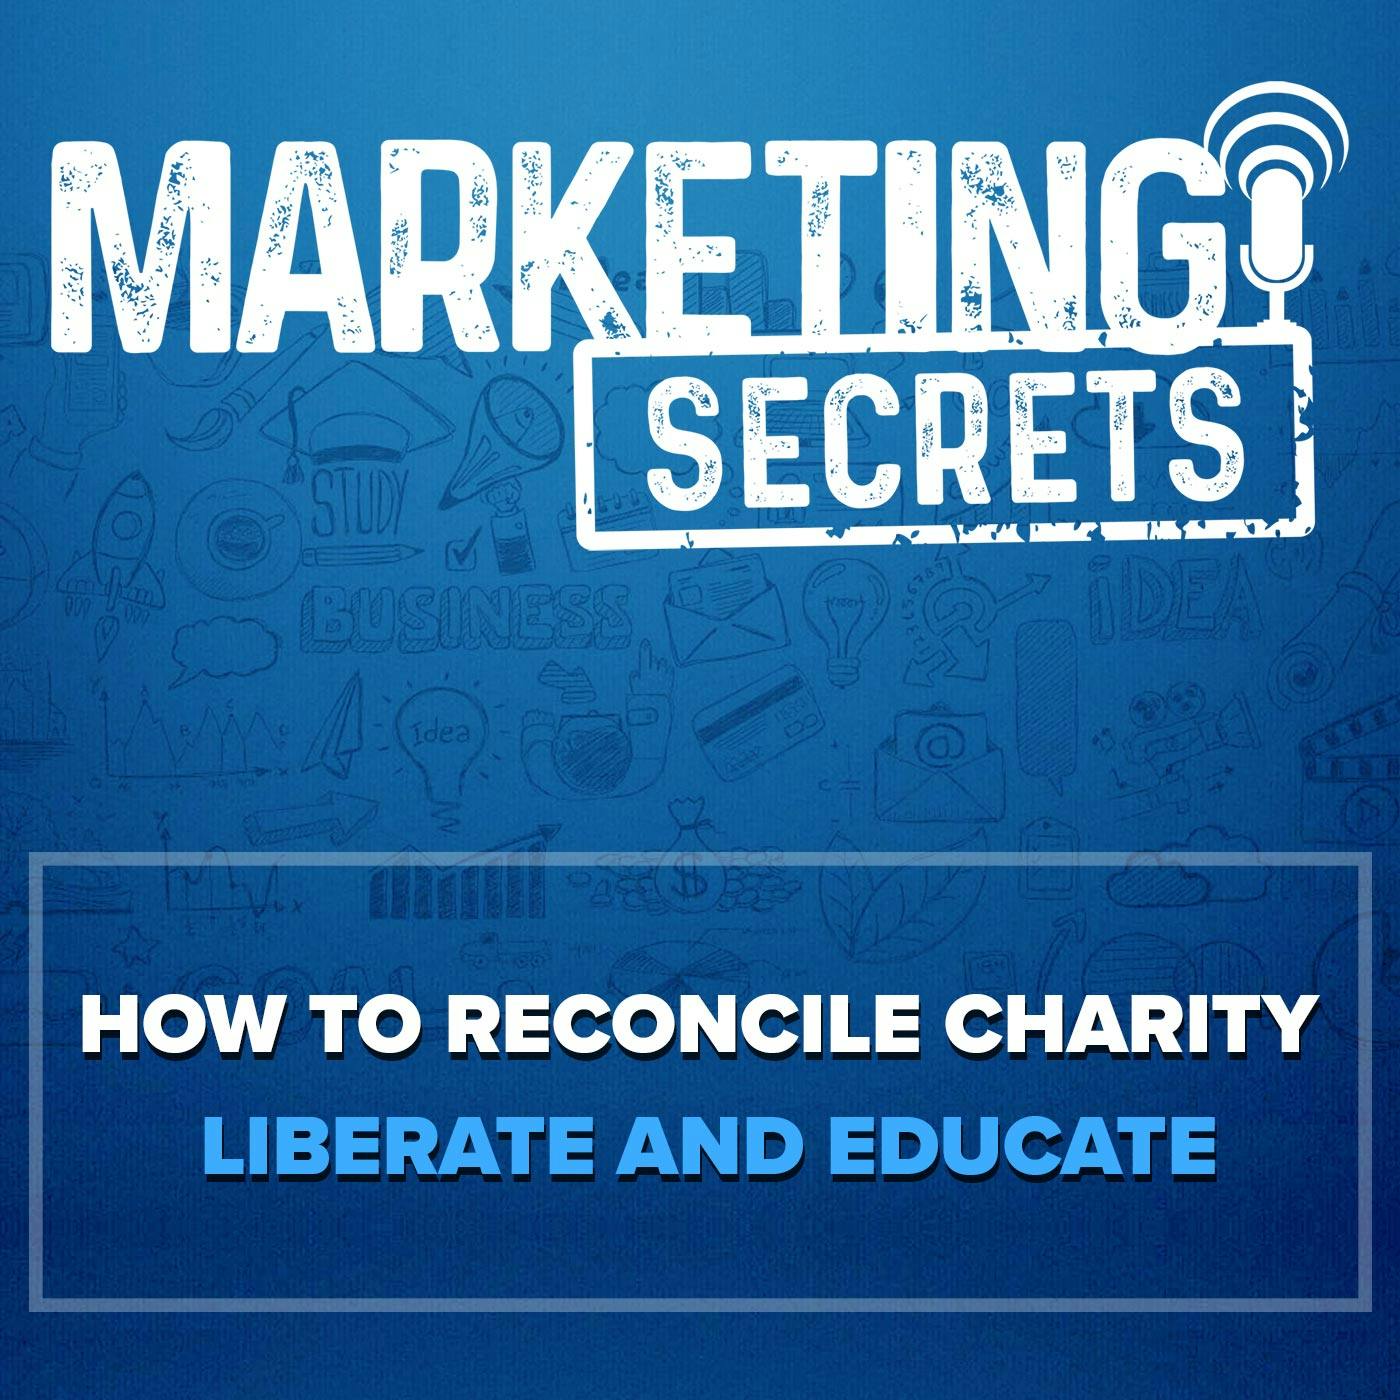 How to Reconcile Charity - Liberate and Educate